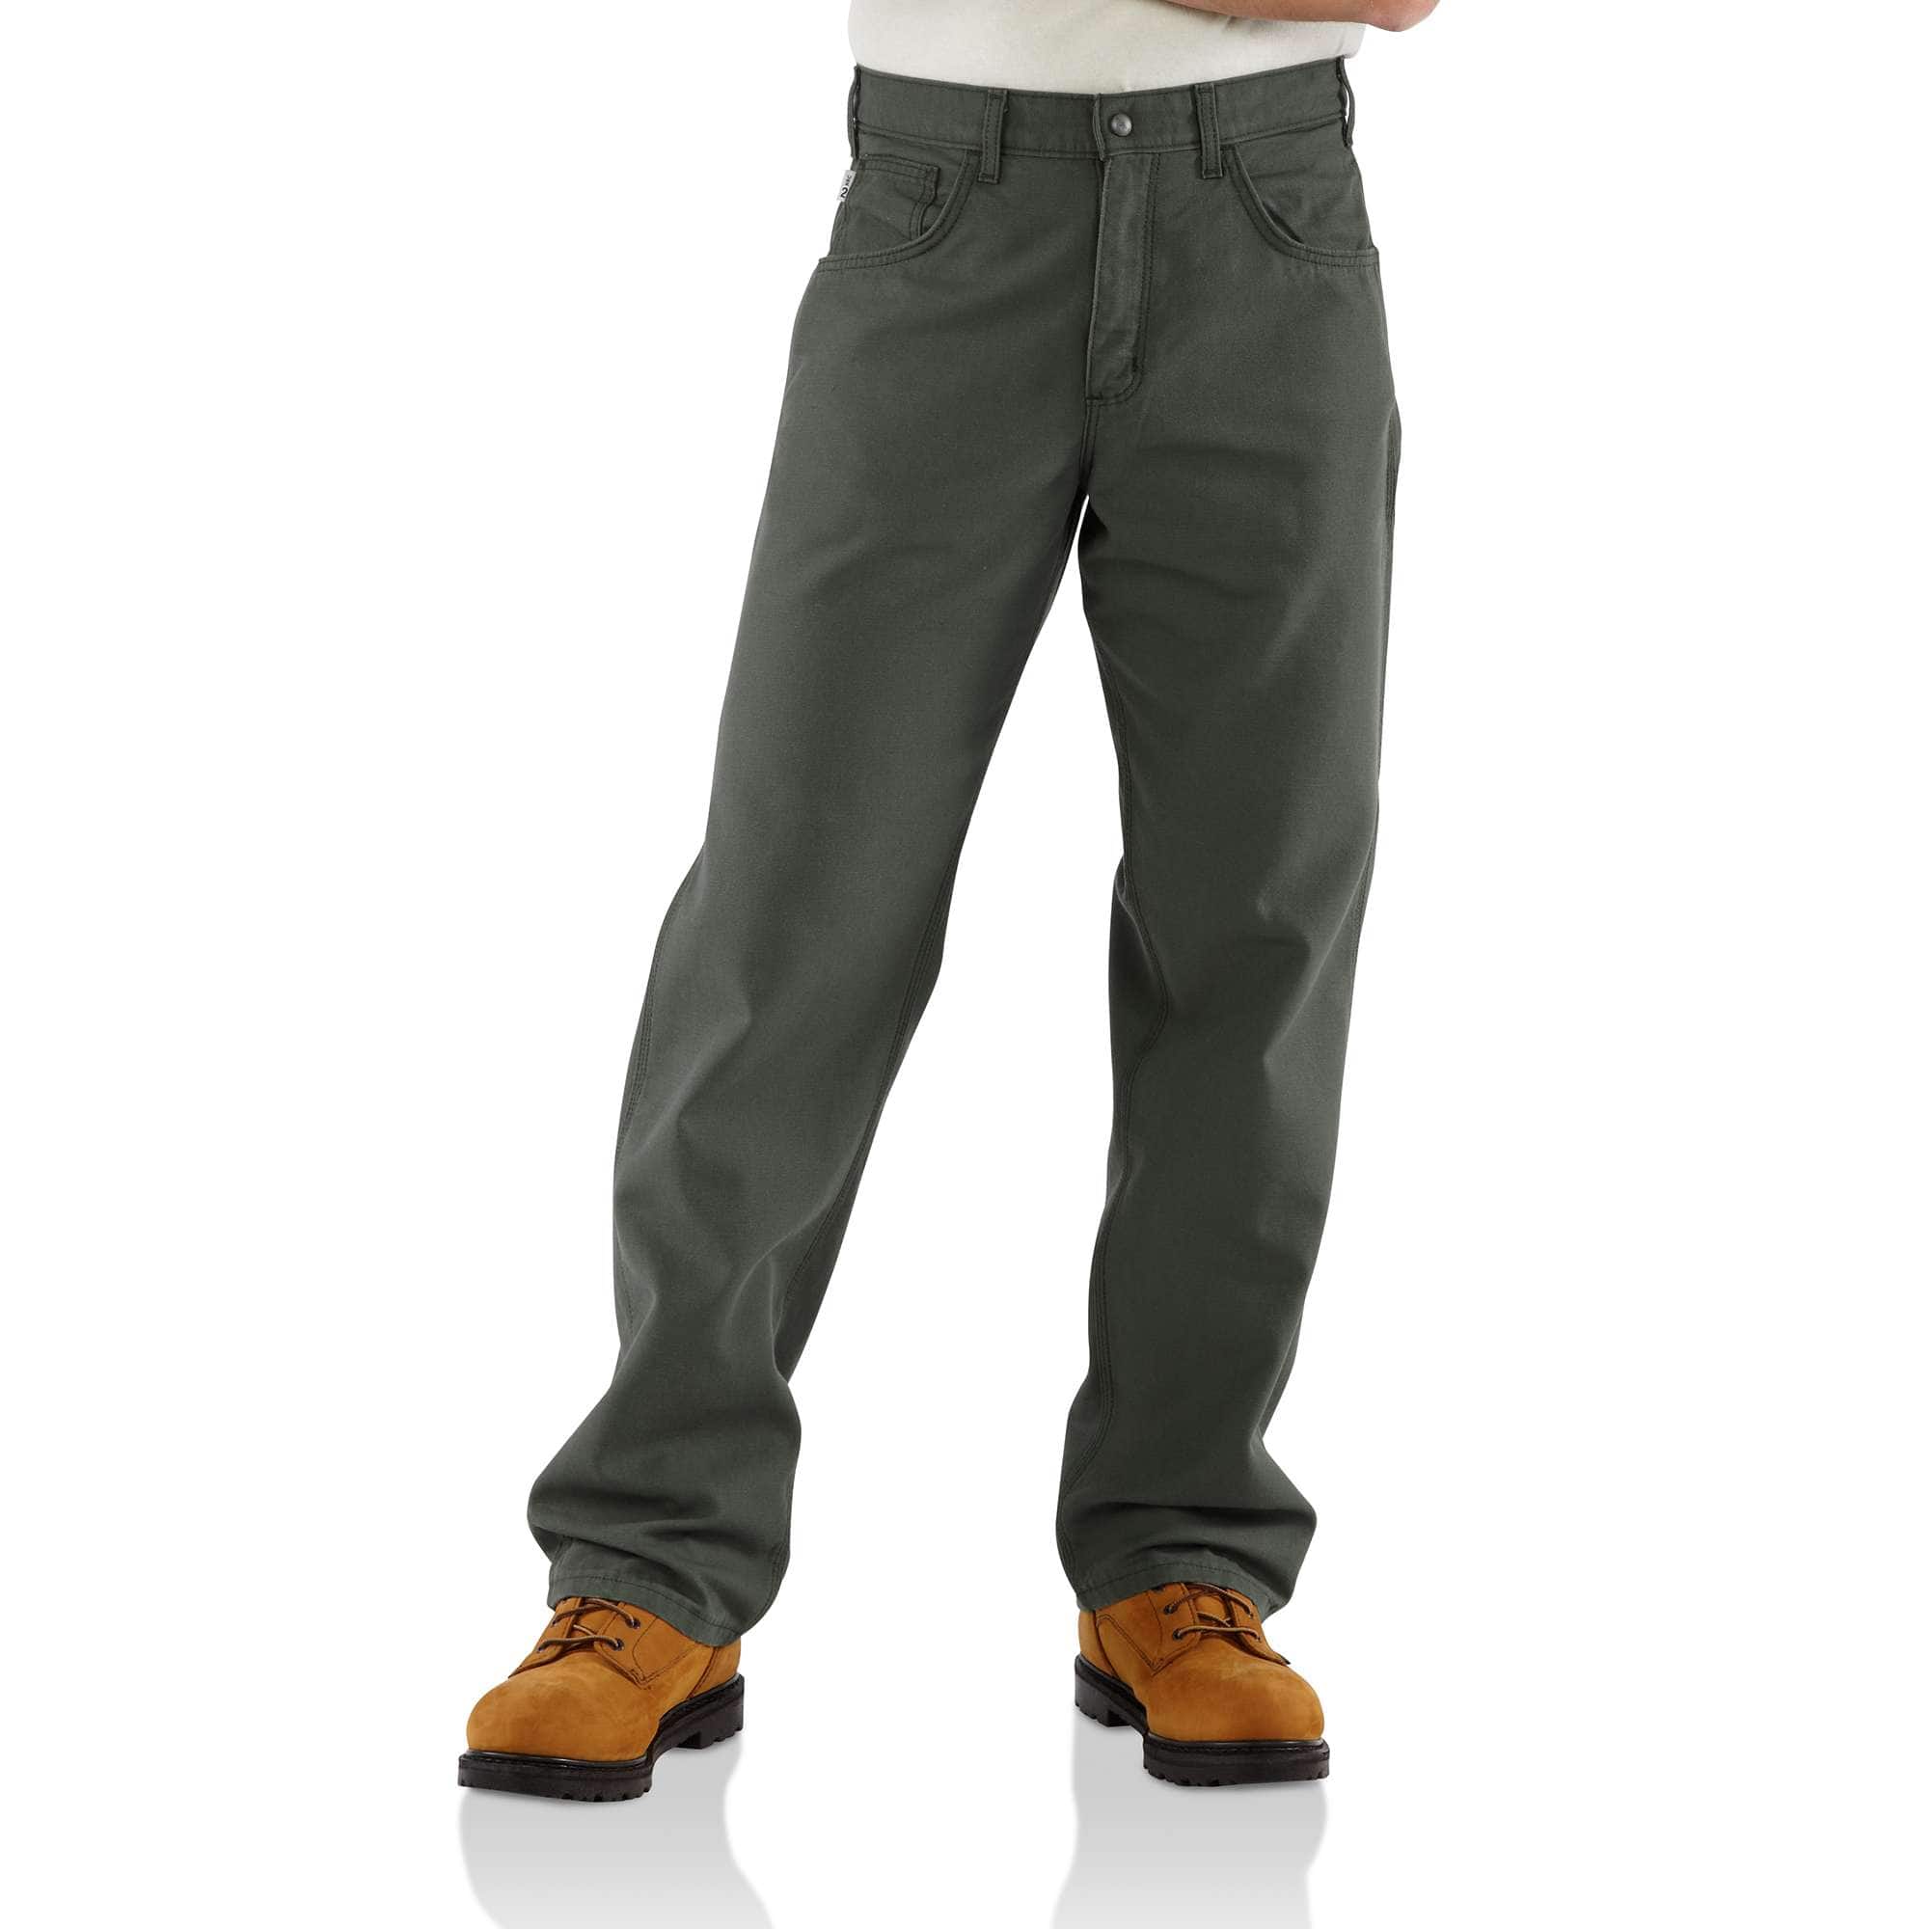 Carhartt Fire Resistant Loose Fit Pant - FRB159 – JobSite Workwear